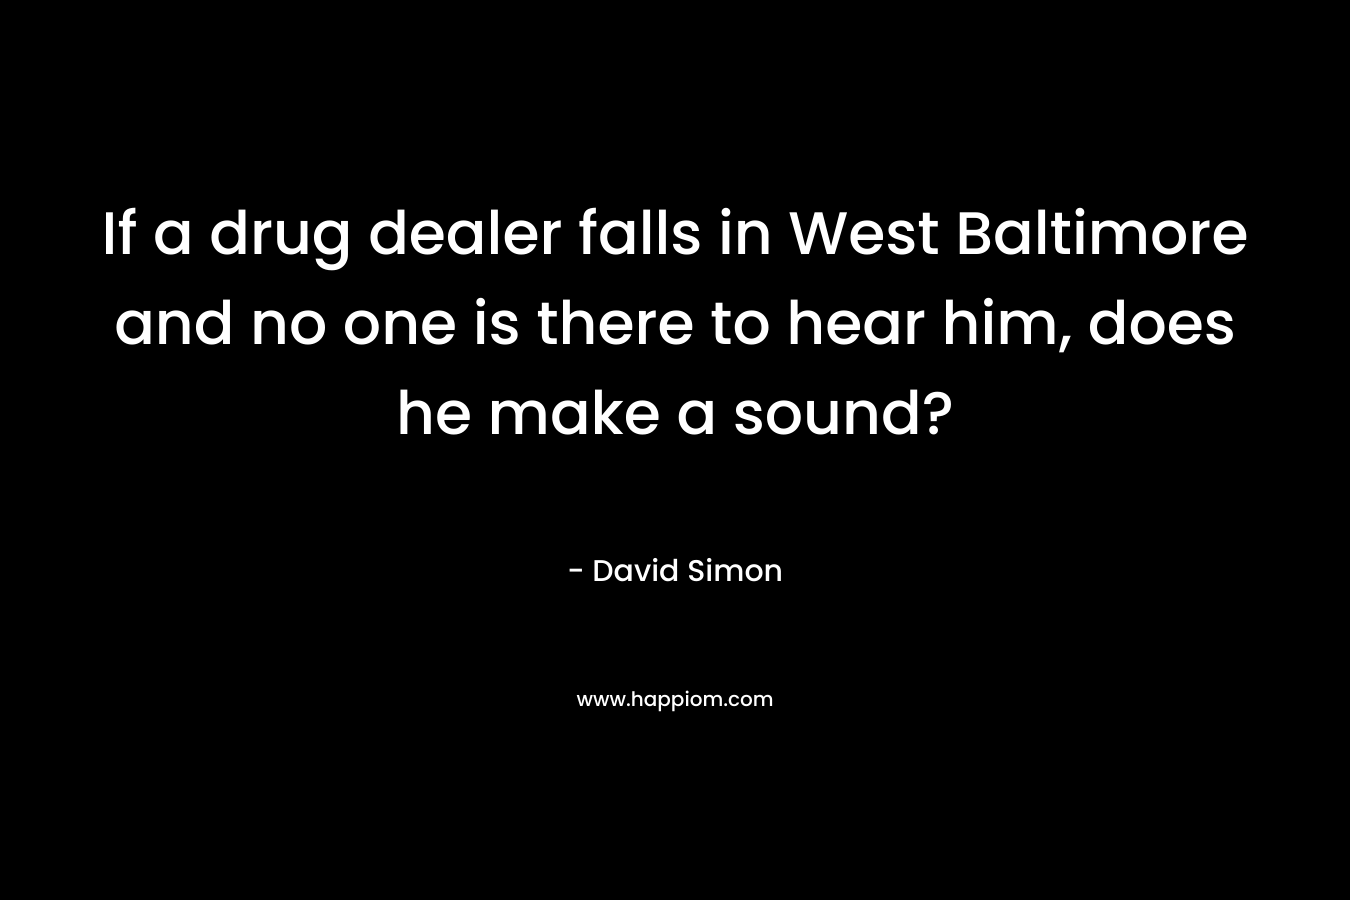 If a drug dealer falls in West Baltimore and no one is there to hear him, does he make a sound? – David Simon